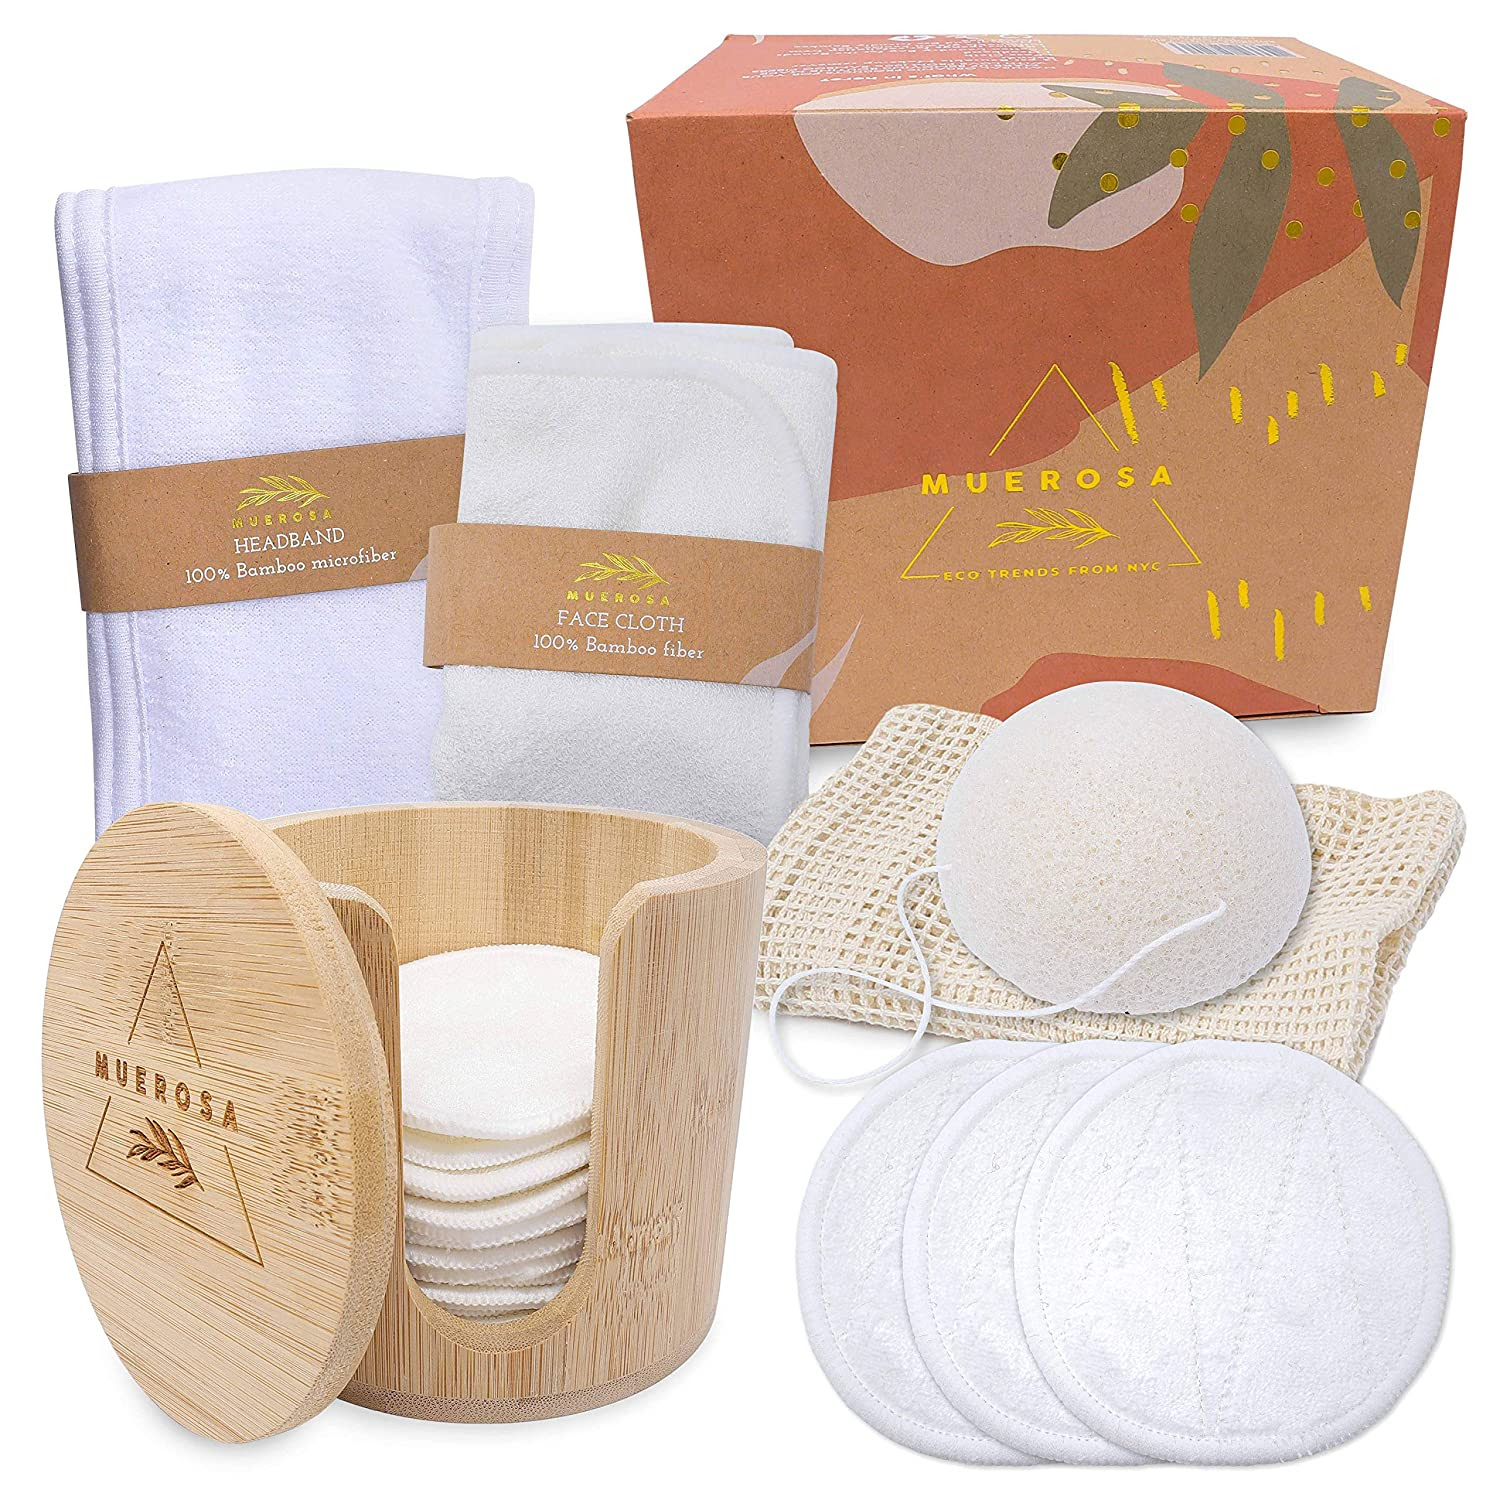 Image of All in One Facial Cleansing Skincare Set, 14 pcs Reusable Bamboo Makeup Remover Pads, Sponge, Face Cloth, Headband, Bamboo Storage Box, Laundry Bag